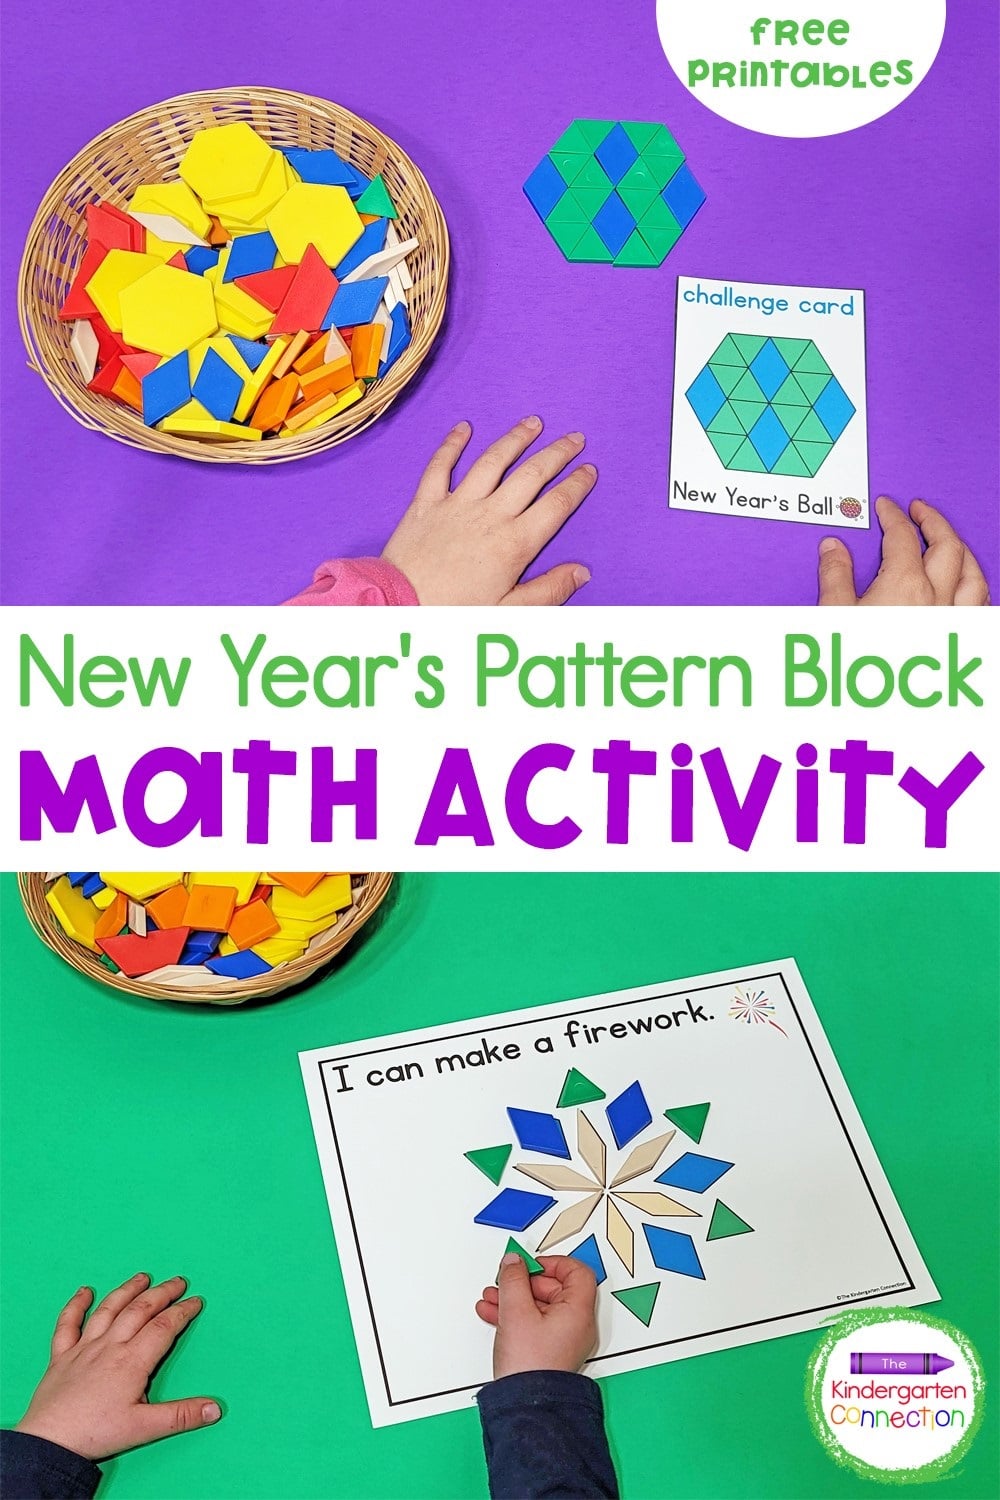 This free New Year's Pattern Block Activity is the perfect way to ring in the new year with your students. Add it to your math centers today!